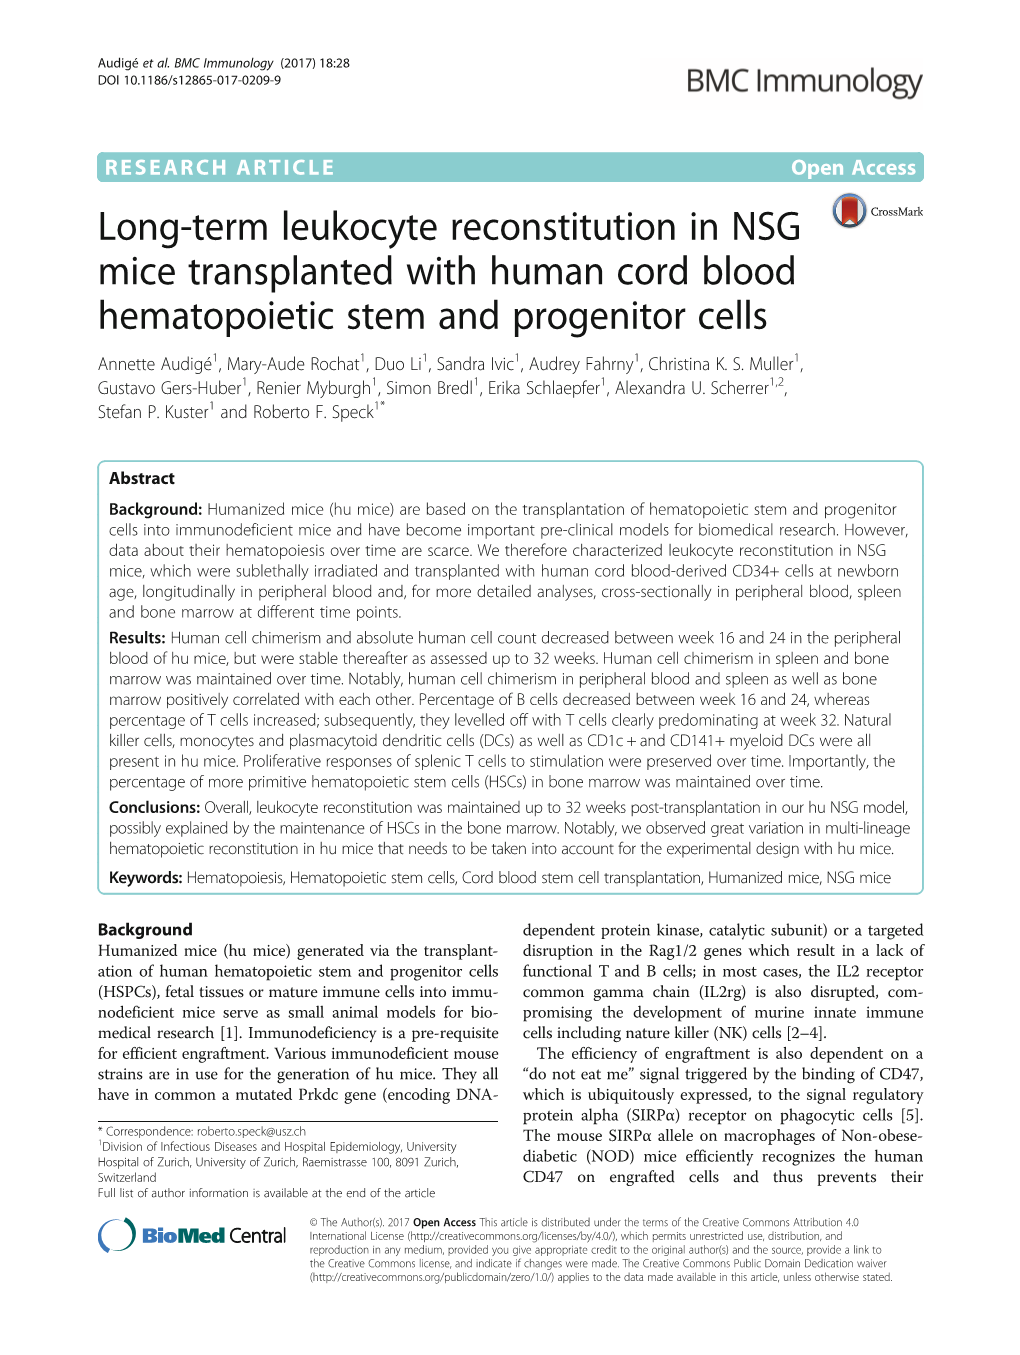 Long-Term Leukocyte Reconstitution in NSG Mice Transplanted with Human